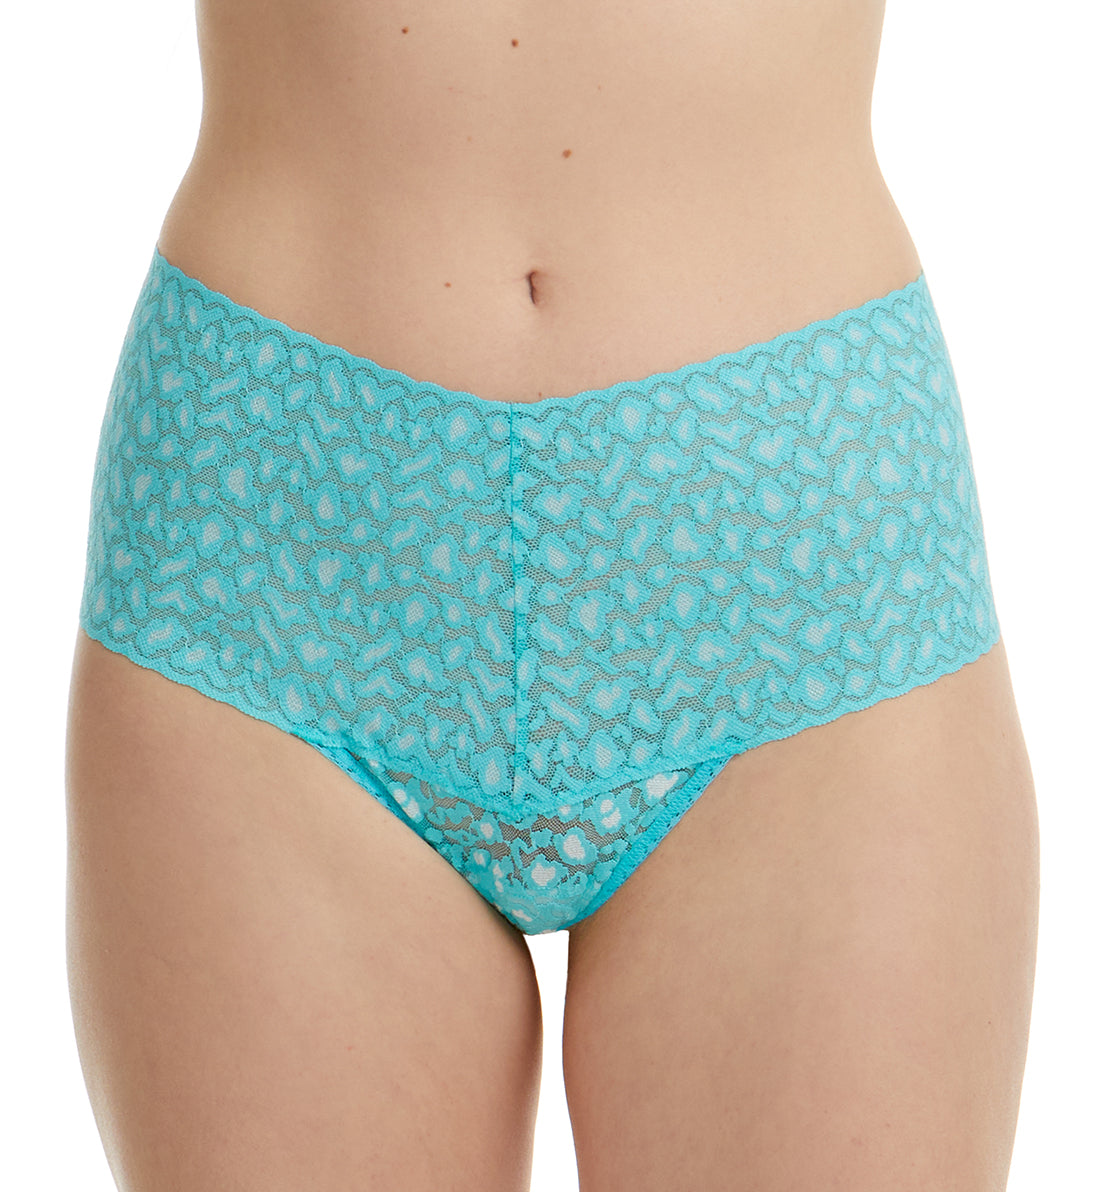 Hanky Panky Cross Dyed Leopard High-Waist Retro Thong (7J1921),Radiant Turquoise/White - Radiant Turquoise/White,One Size